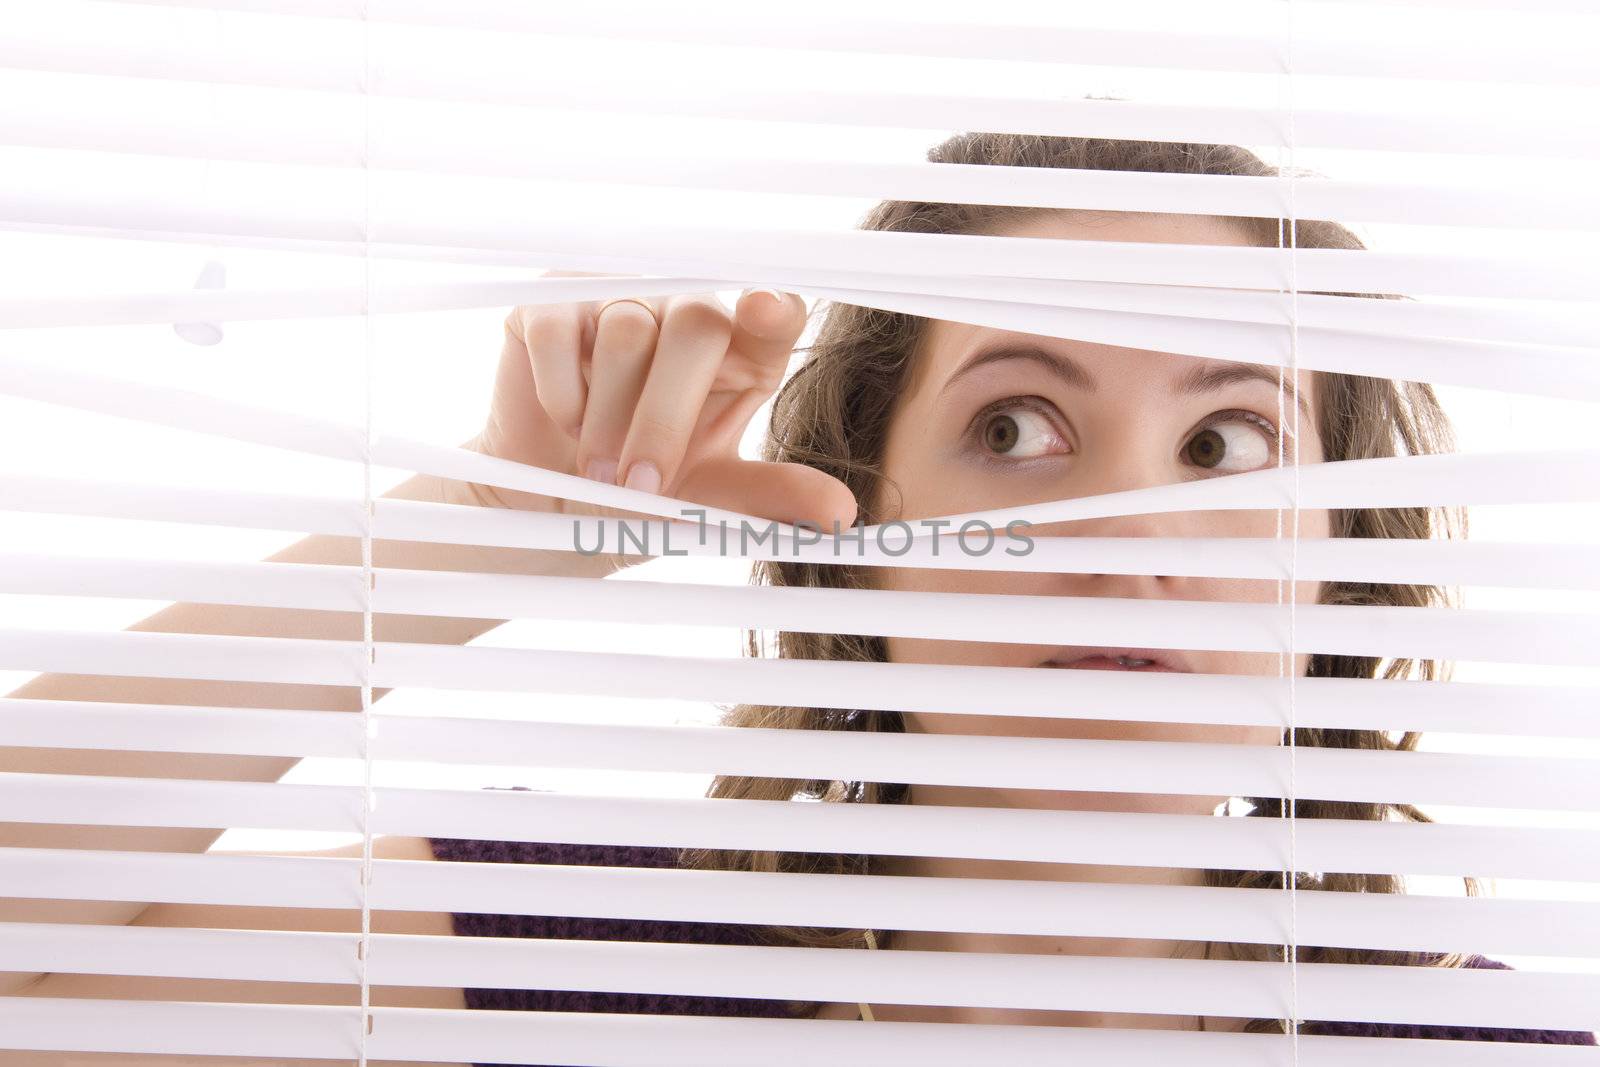 hands apart on the window blinds